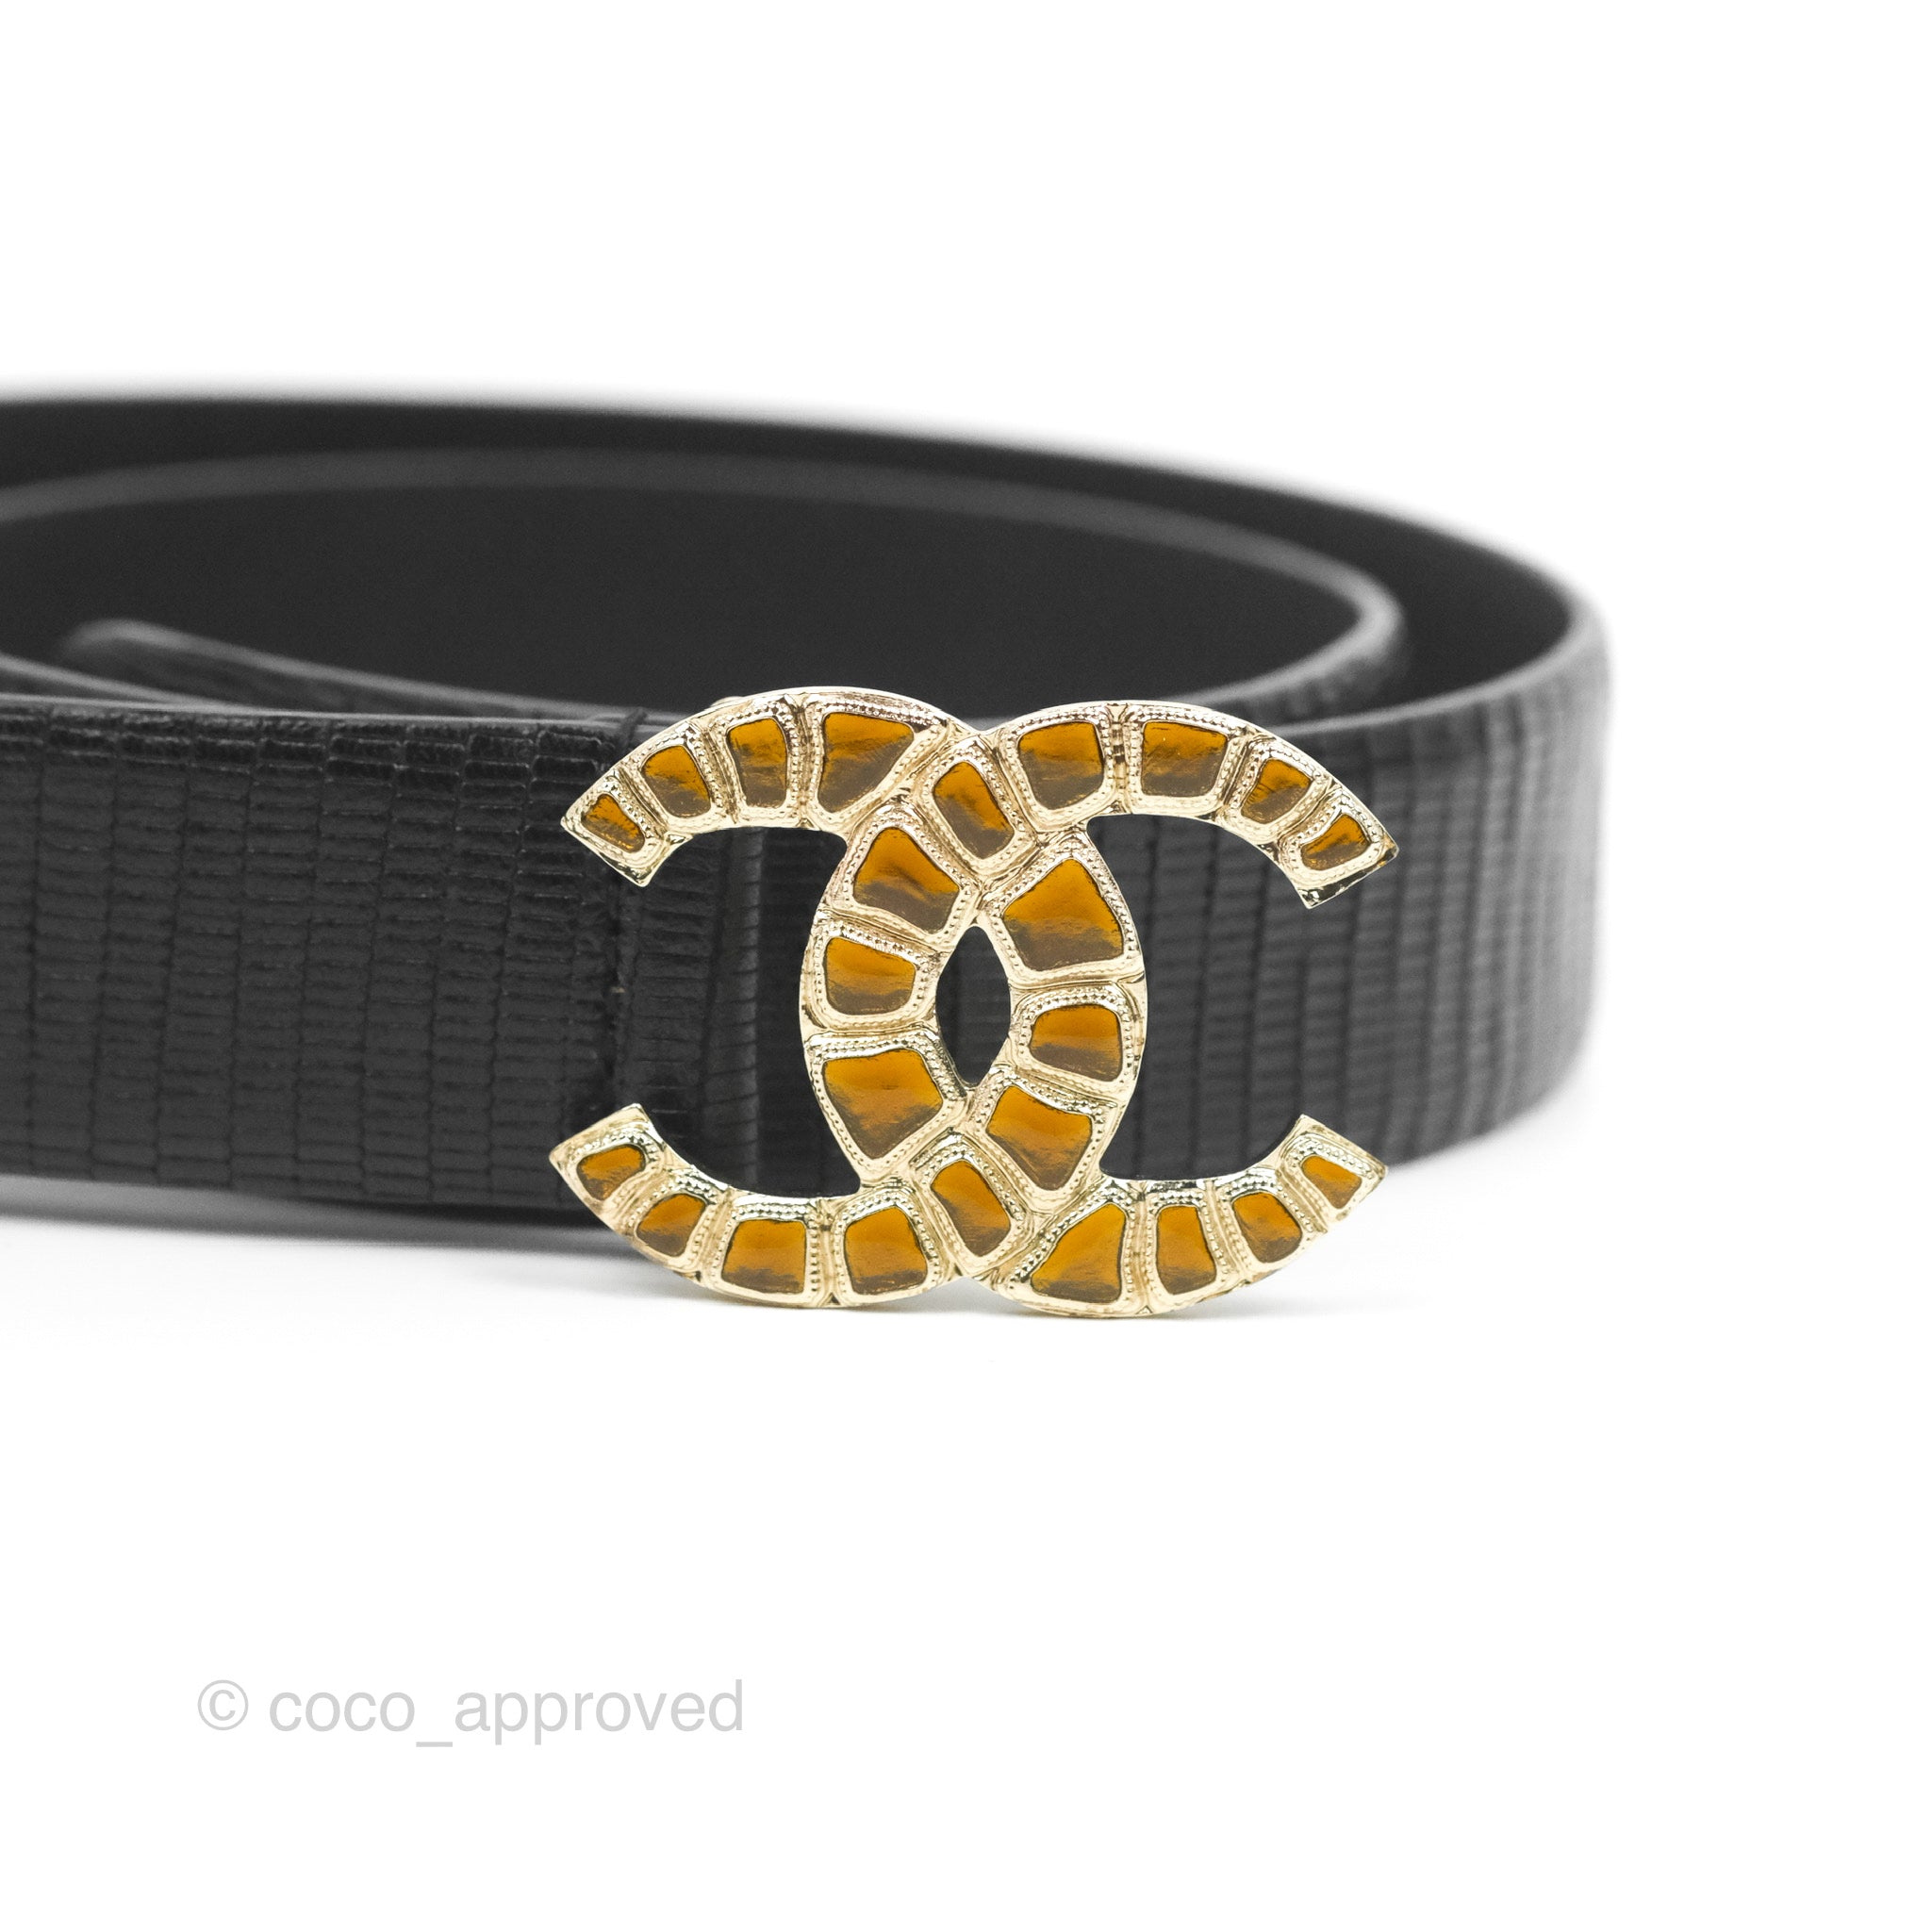 Chanel CC Leather Belt Black Crystal Size 75 19A – Coco Approved Studio